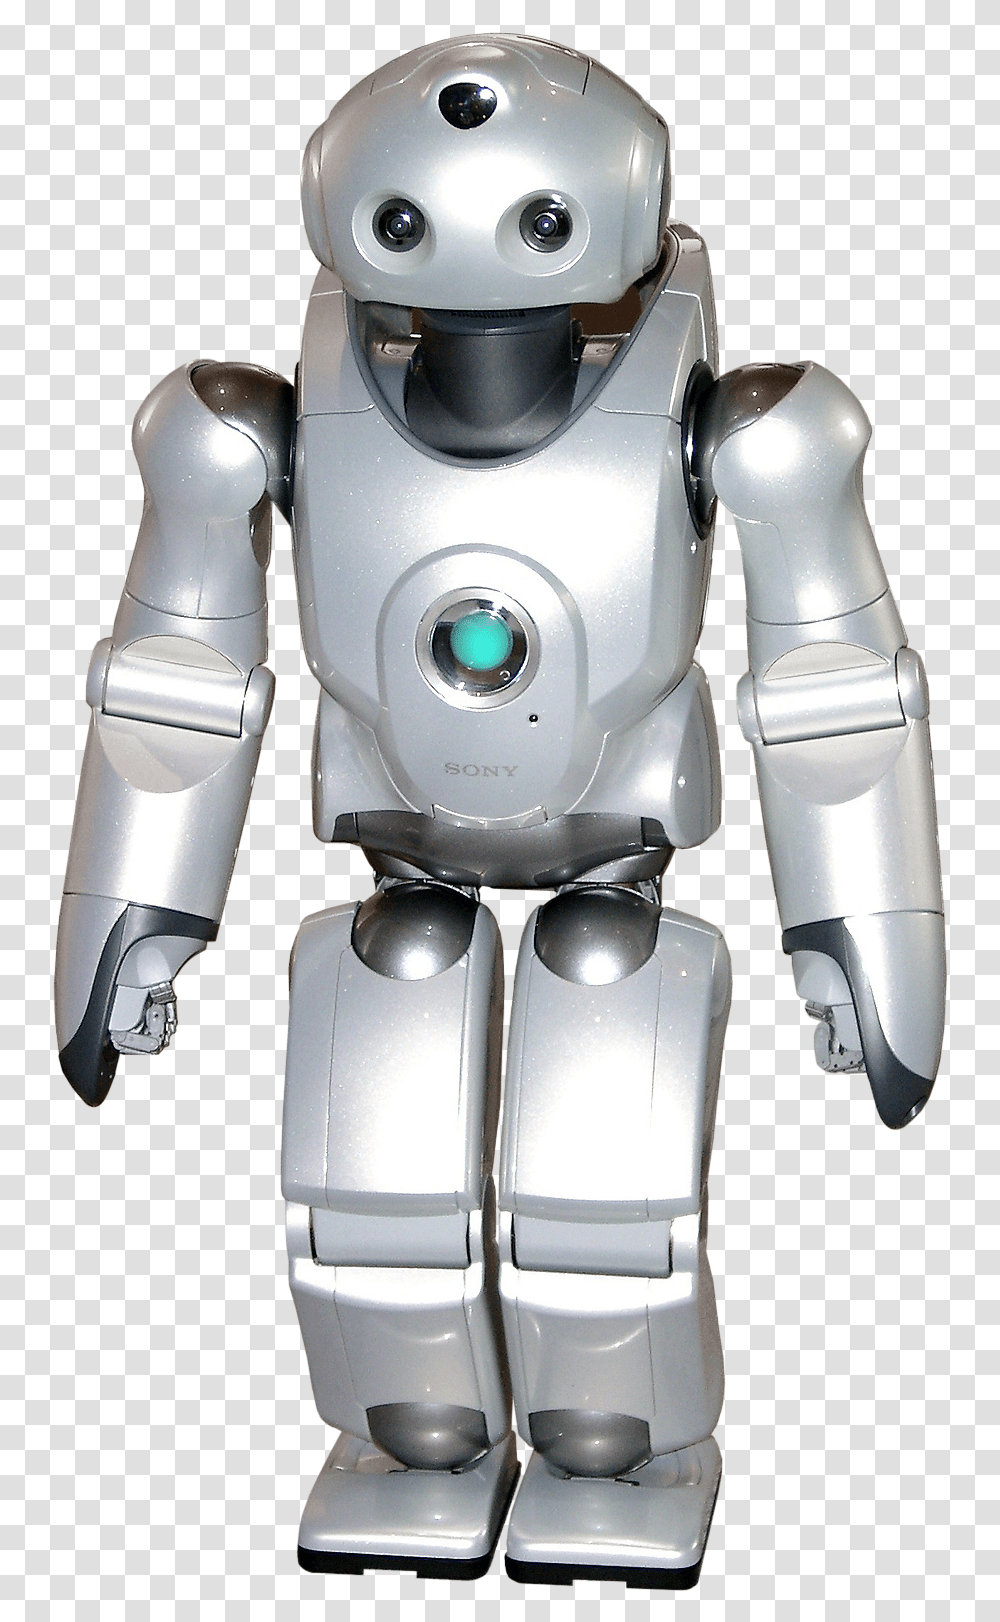 File Sony Qrio Robot Wikimedia Commons Qrio, Toy, Helmet, Apparel Transparent Png